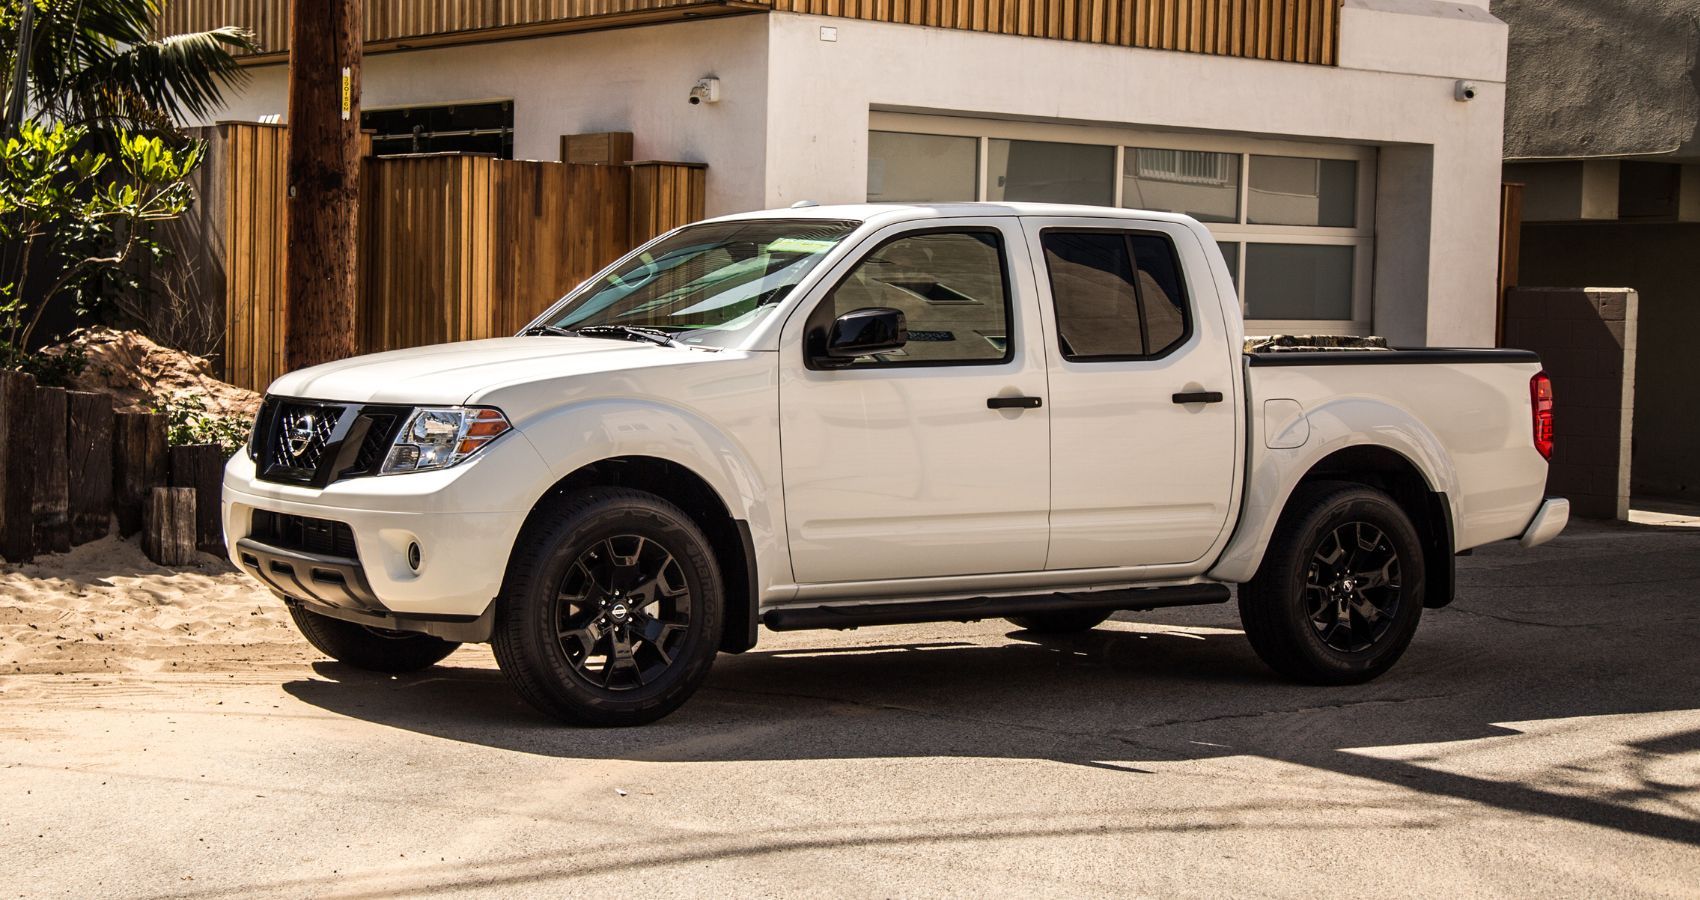 Front quarter view of the 2019 Nissan Frontier.